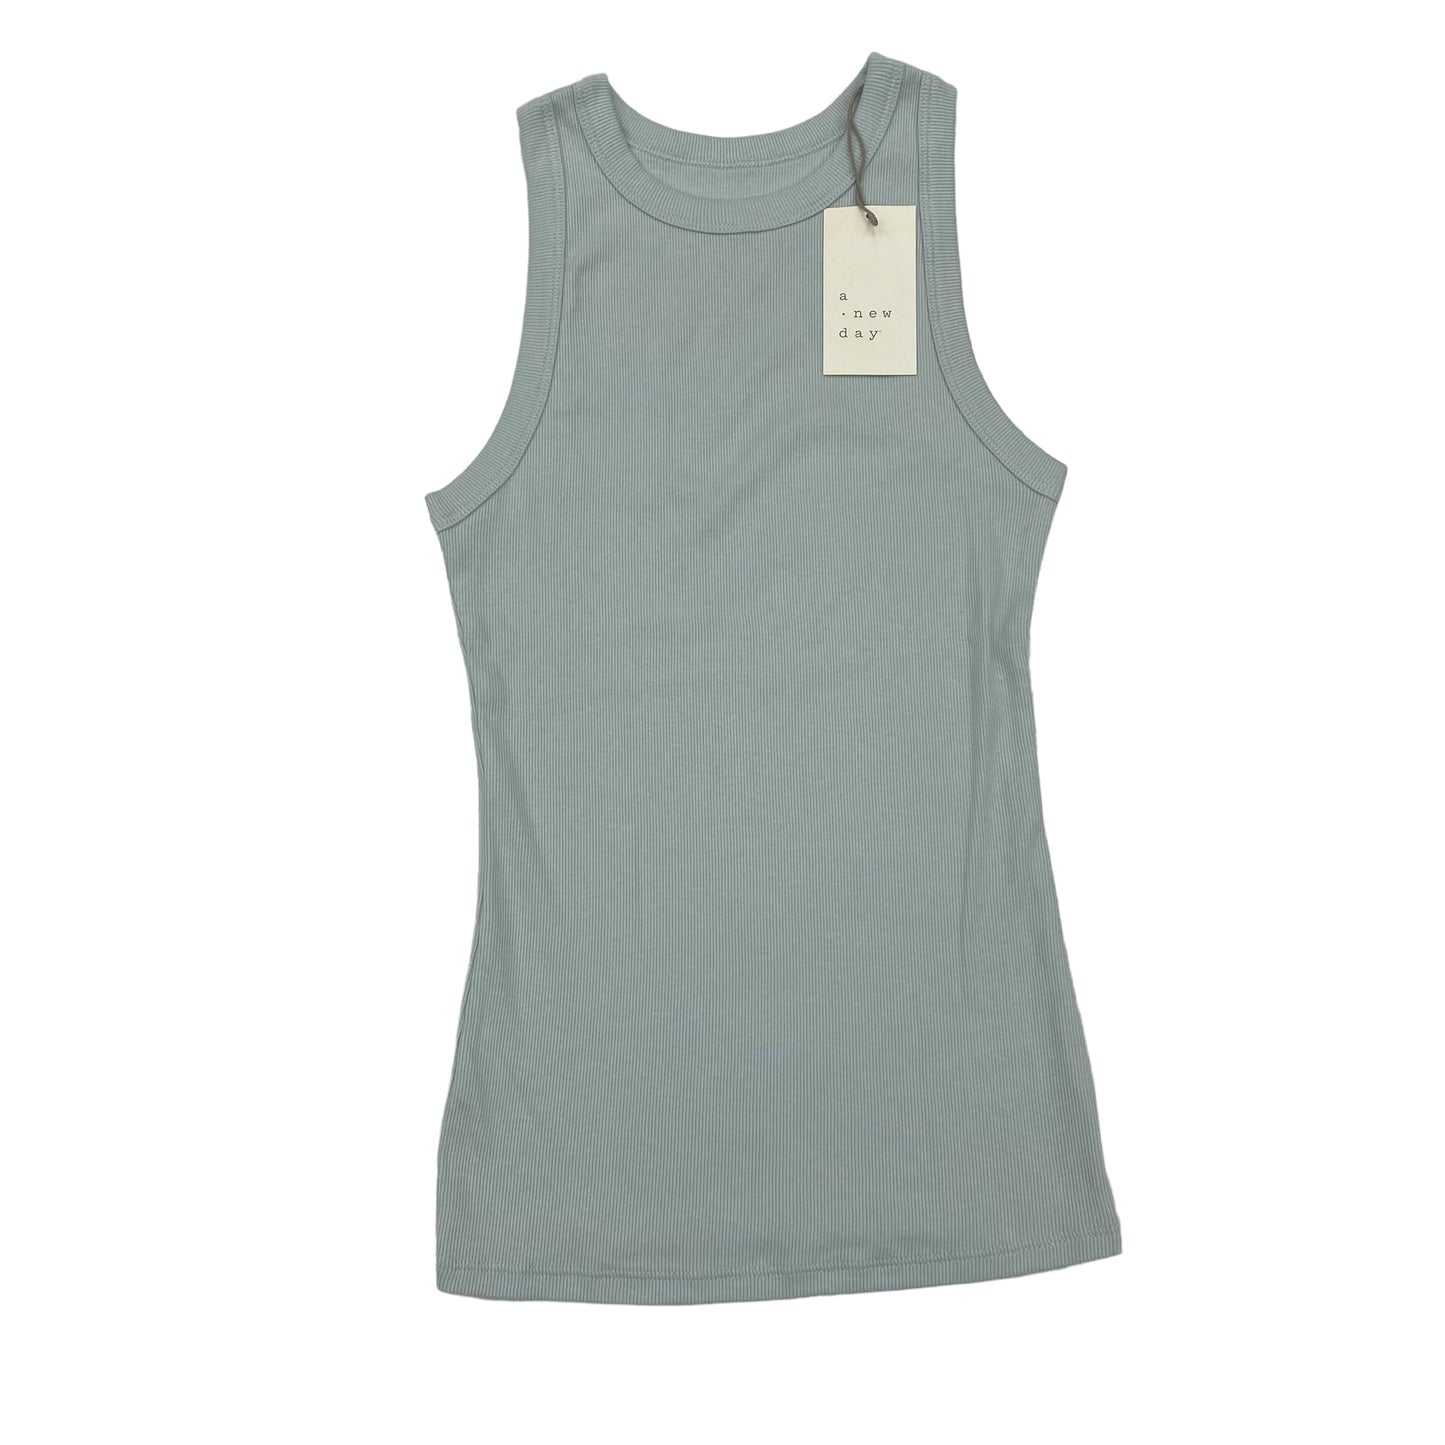 GREEN A NEW DAY TANK TOP, Size S